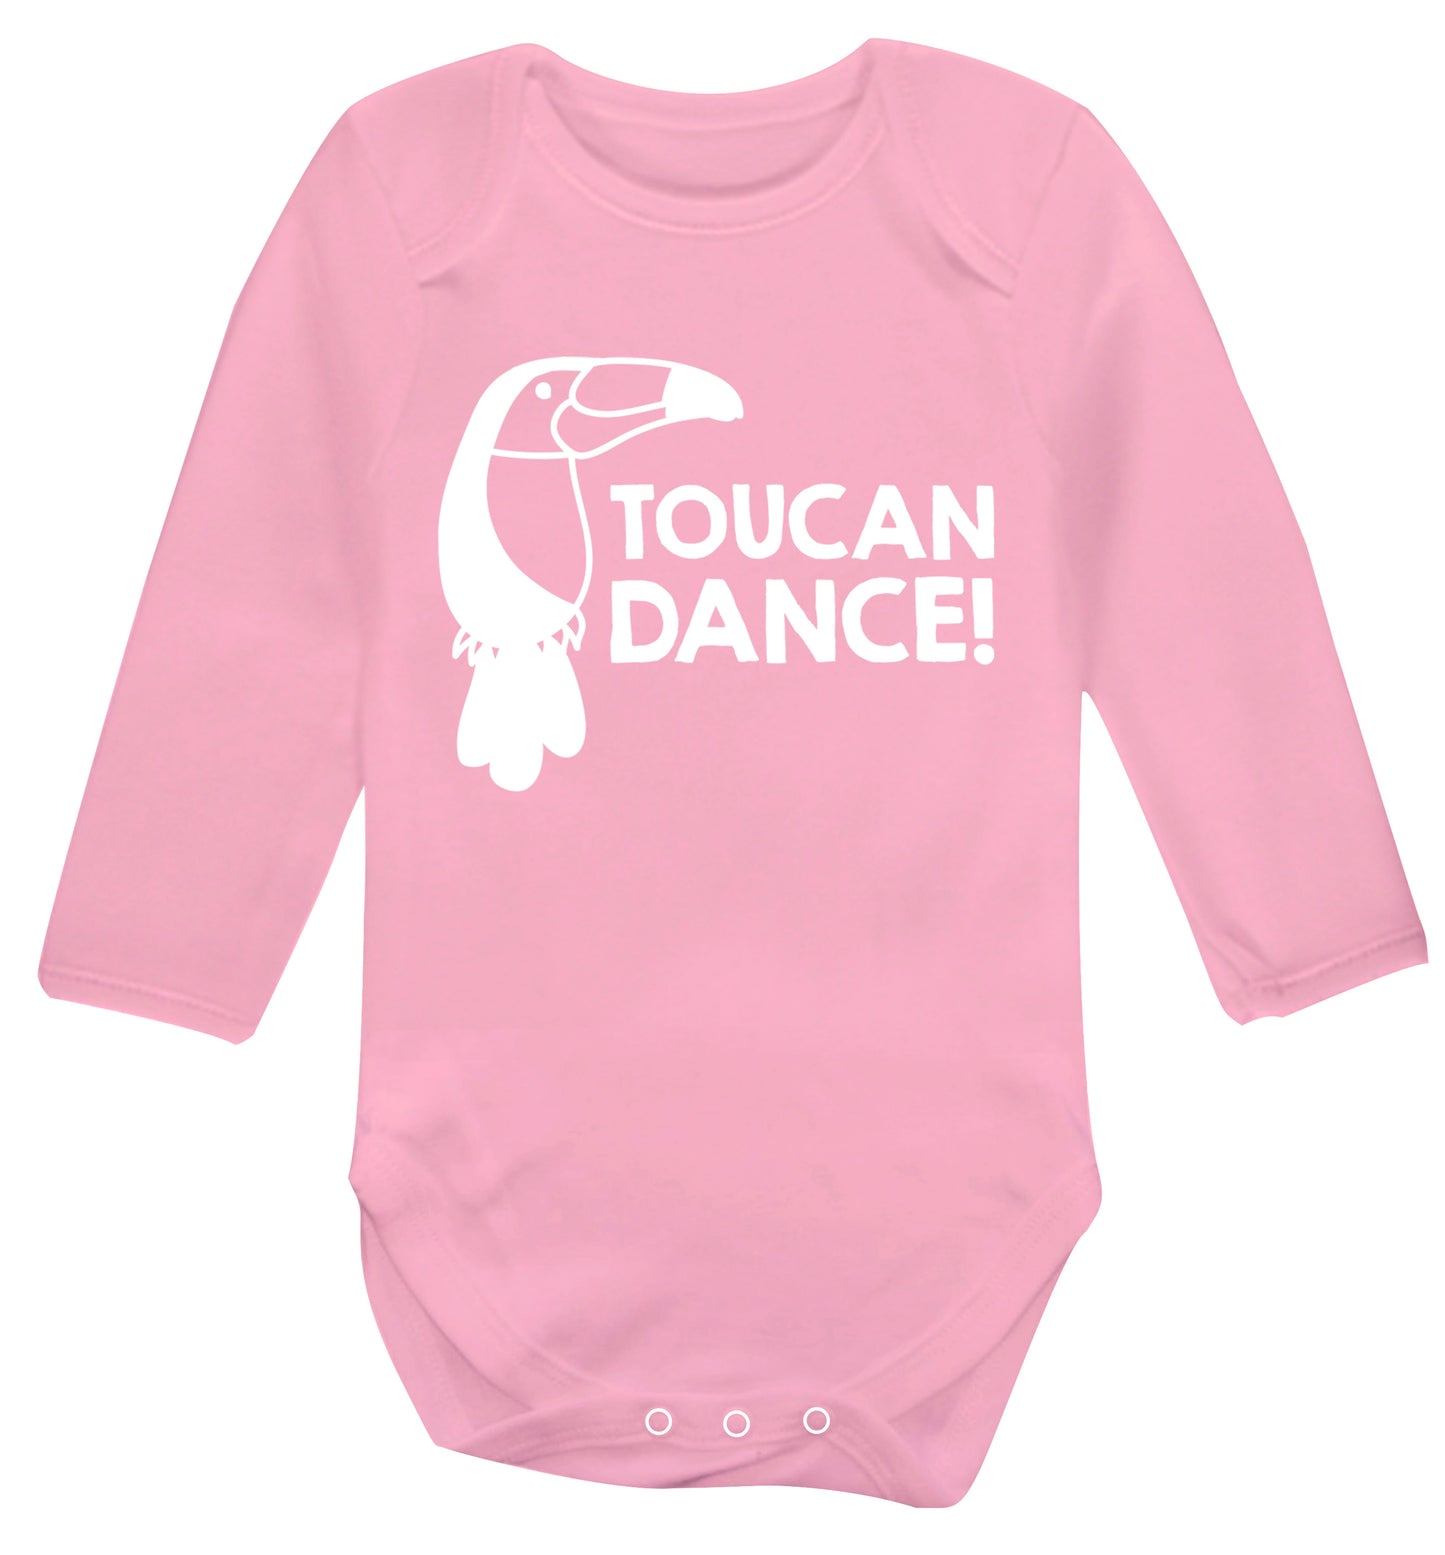 Toucan dance Baby Vest long sleeved pale pink 6-12 months